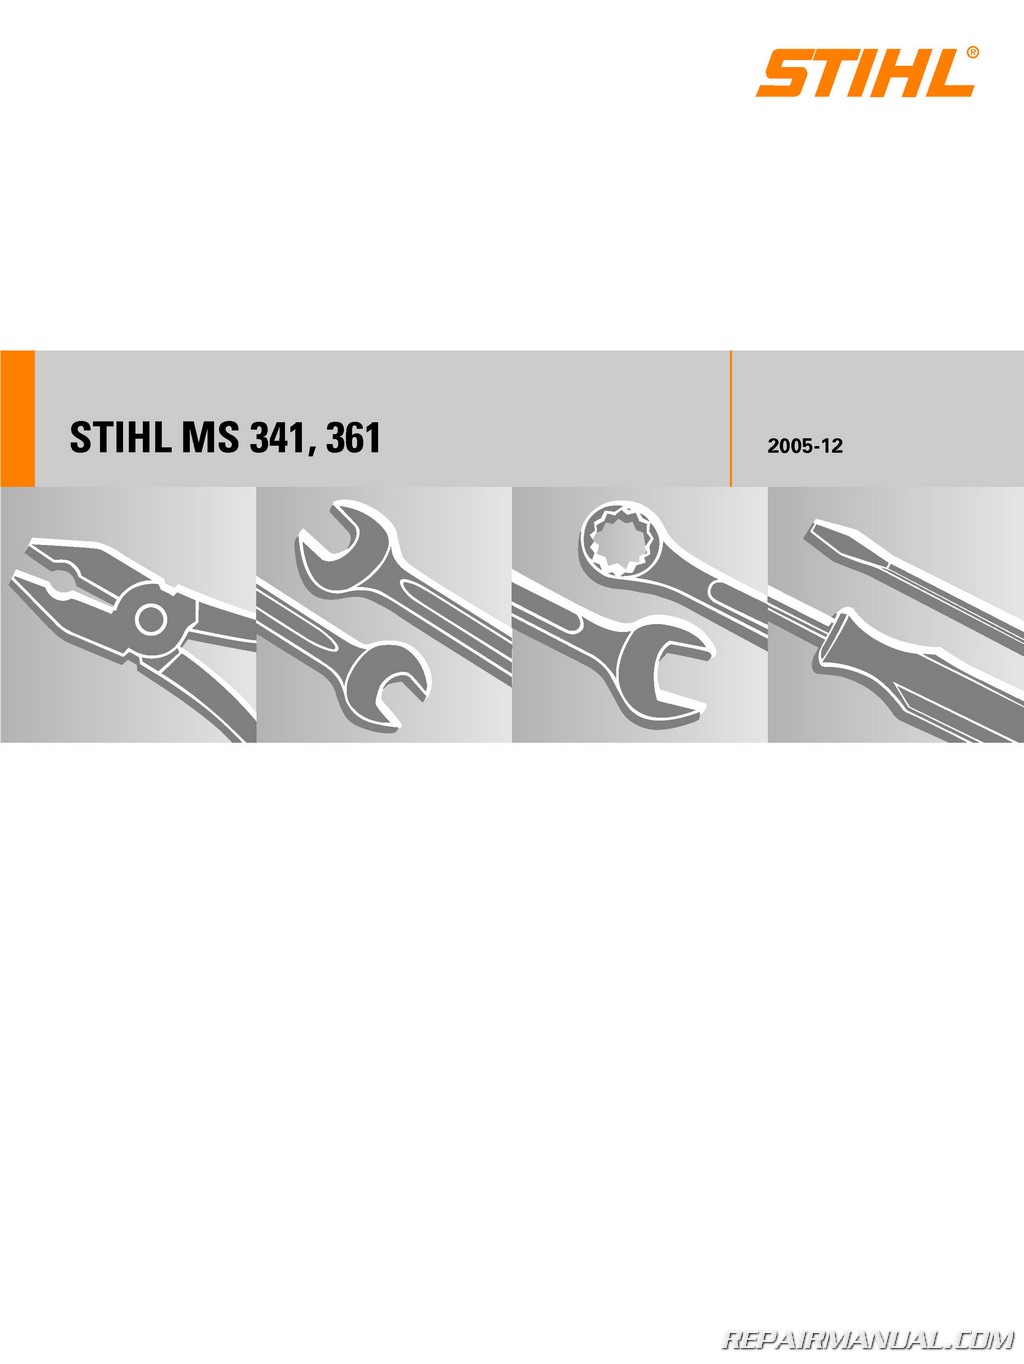 Clutch Springs for Stihl MS 341 361 ms341 ms361 